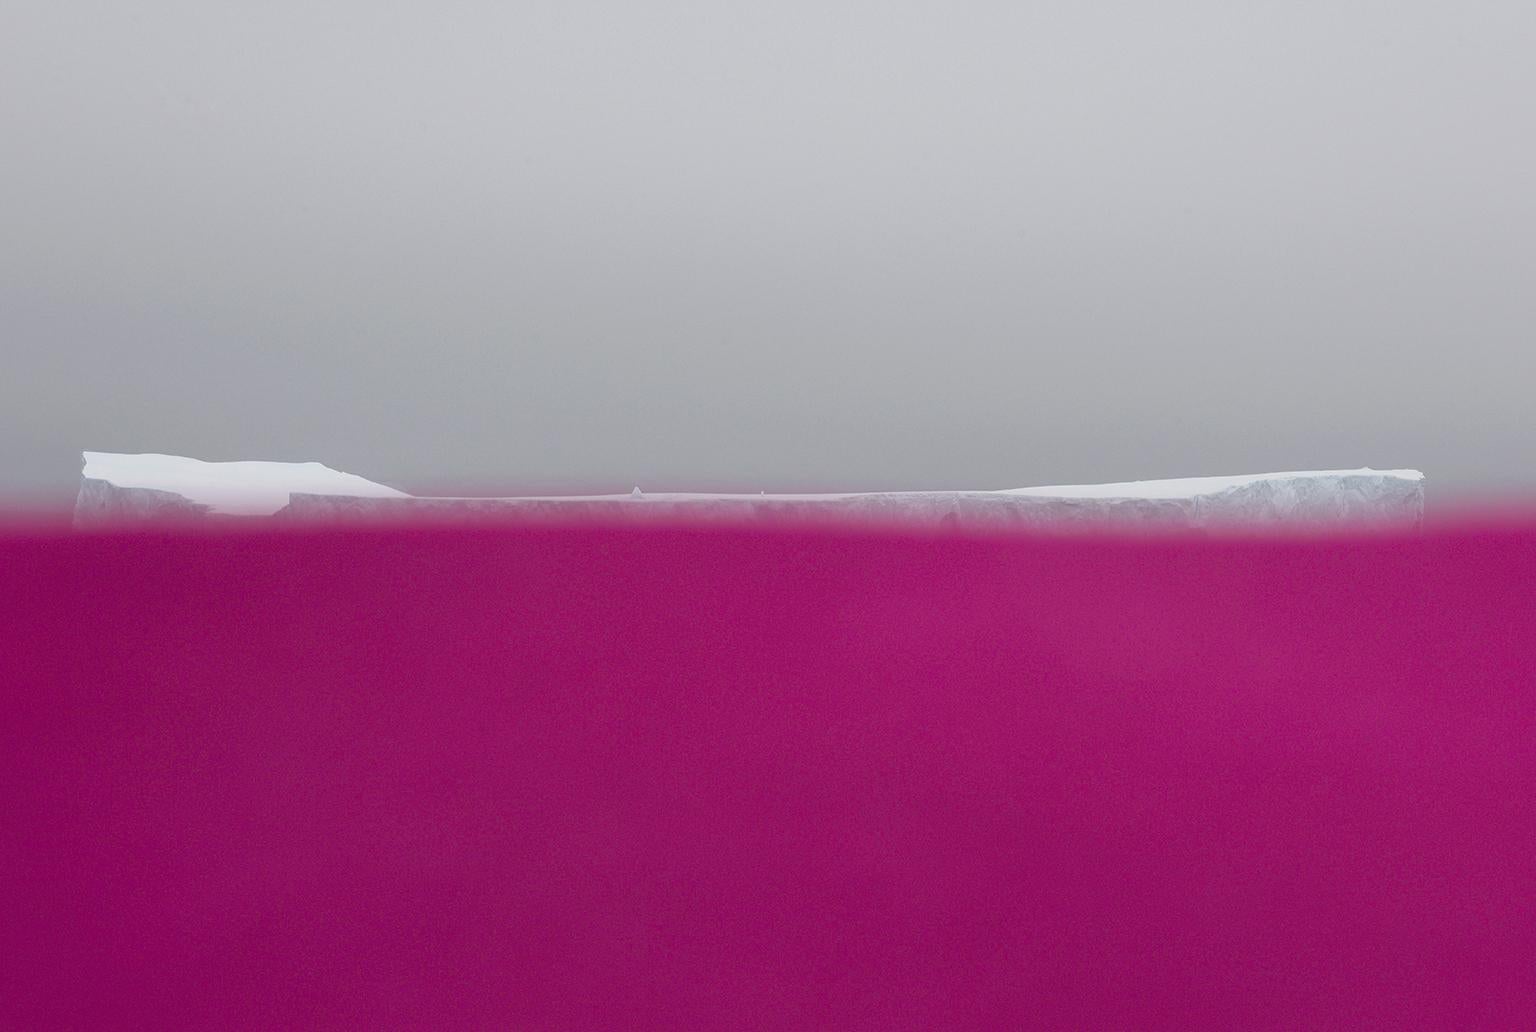 Jessica Houston Abstract Photograph - Ideas in Things (Antarctic Penisula)